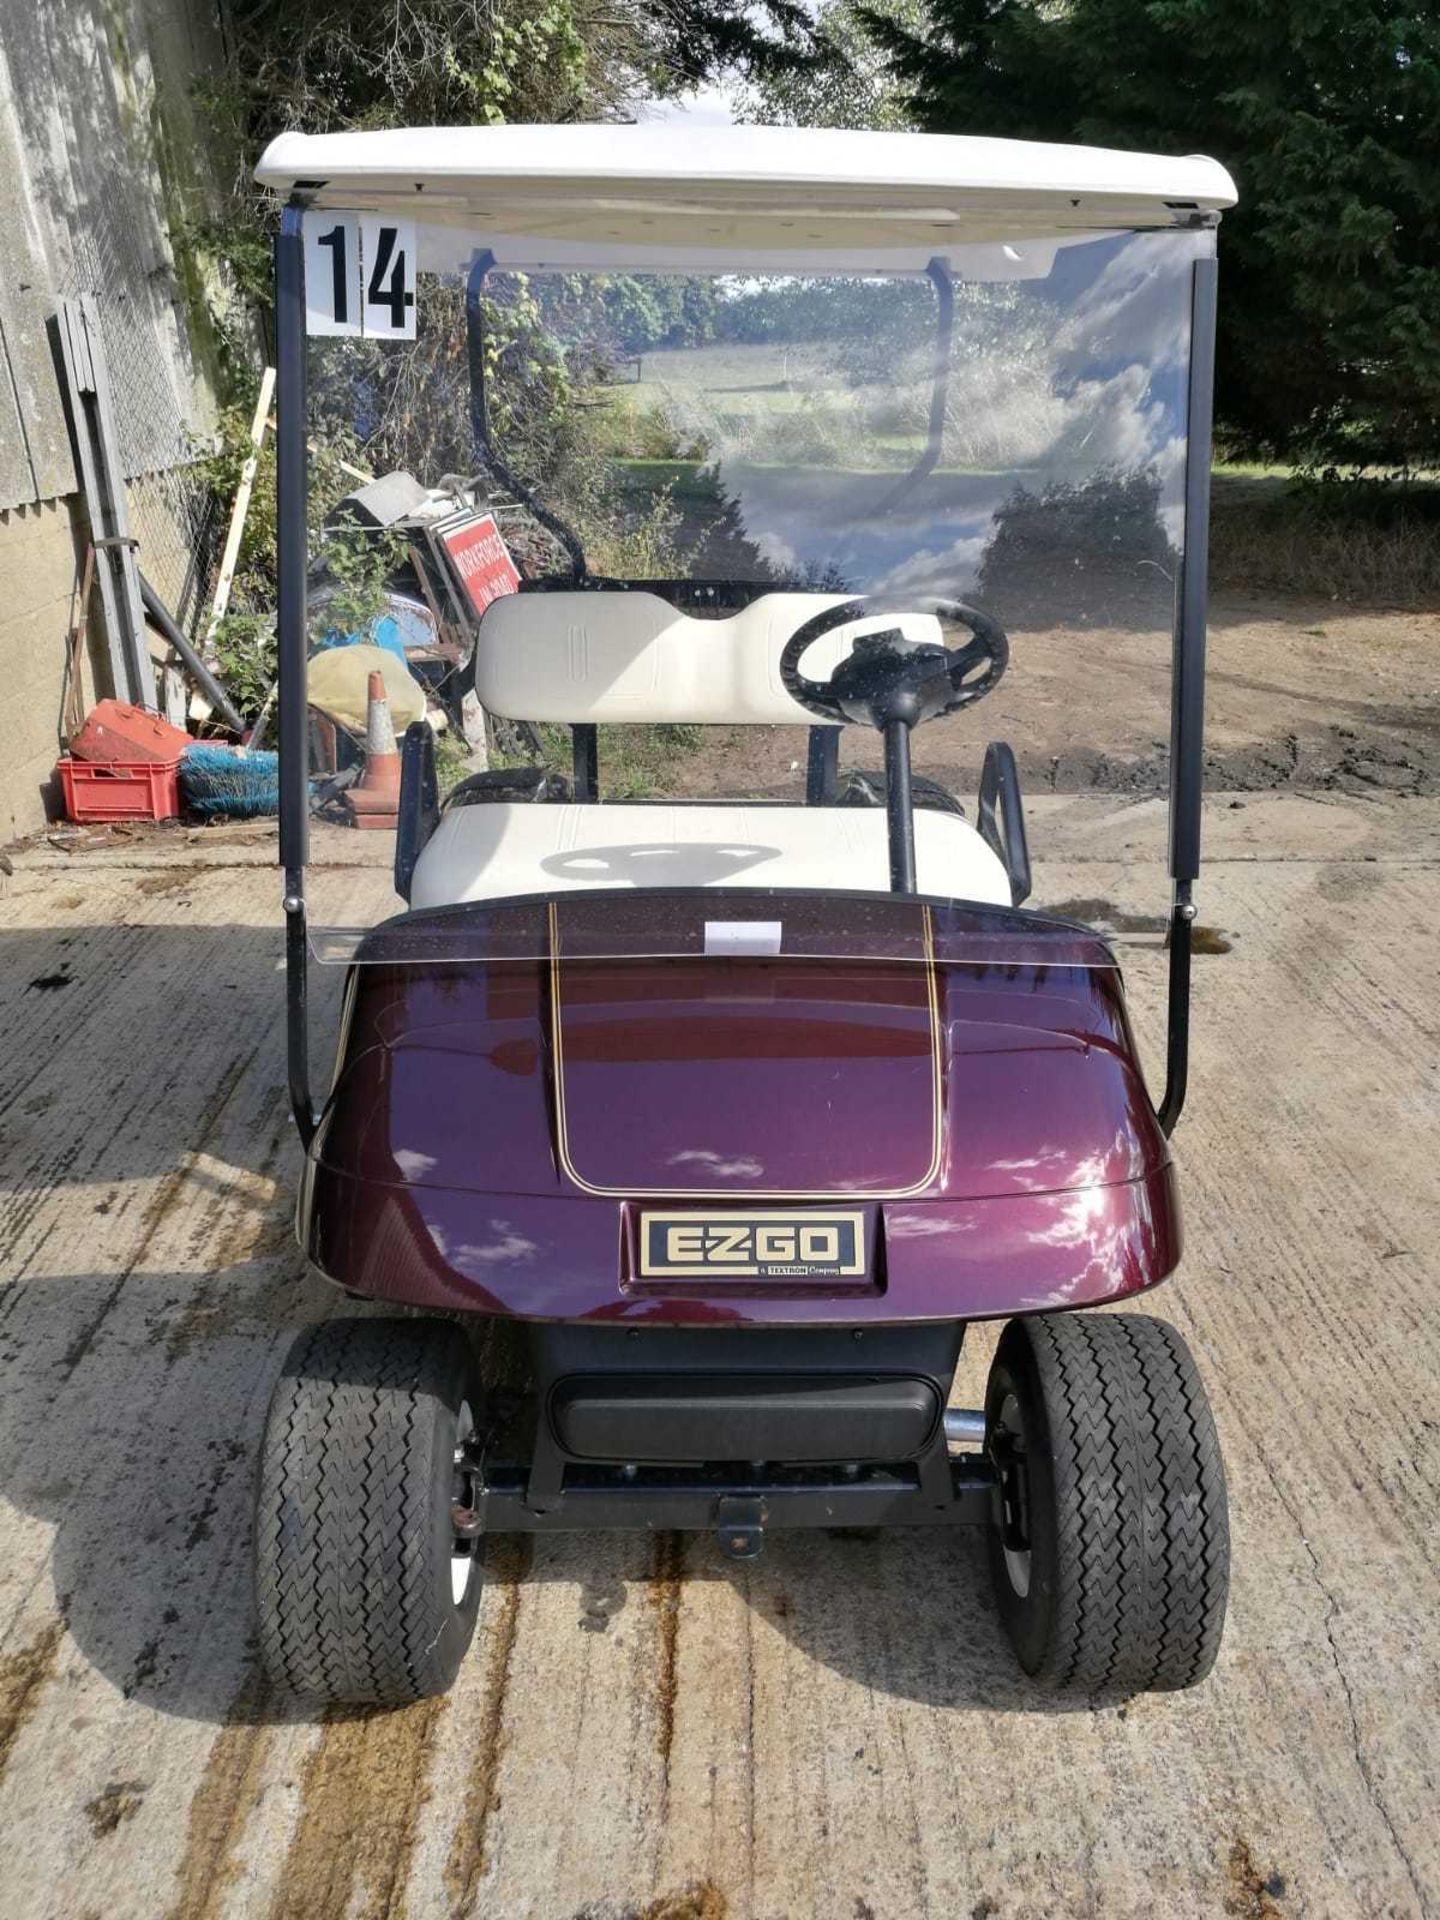 EZGO PETROL GOLF BUGGY, ONLY 0.4 HOURS GENUINE, NEVER USED *PLUS VAT* - Image 3 of 7